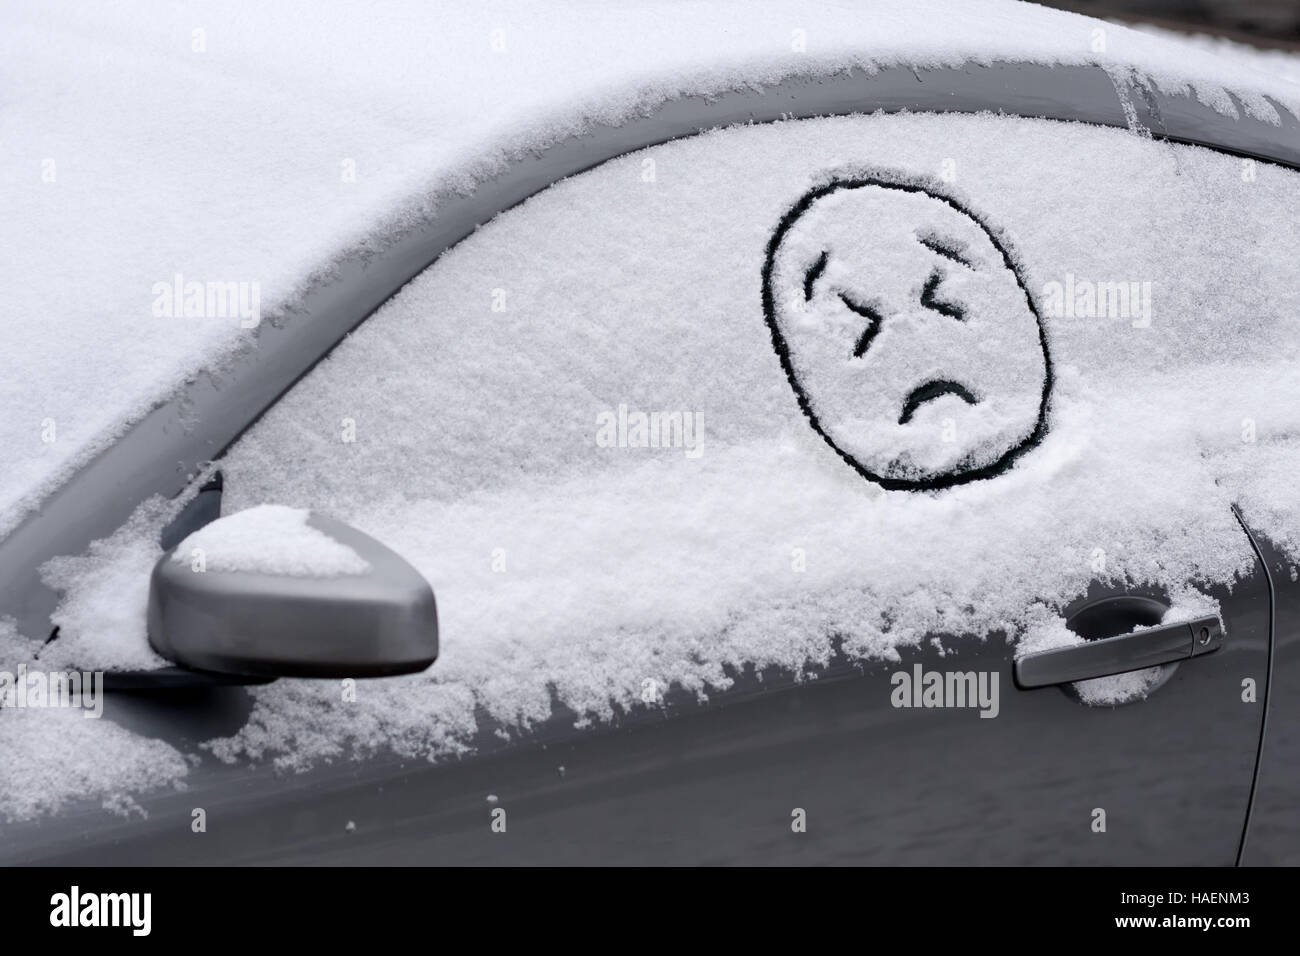 Sad Angry Emoji Face on snow covered car window - frustration, disgust, disappointment about winter early snowfall Stock Photo